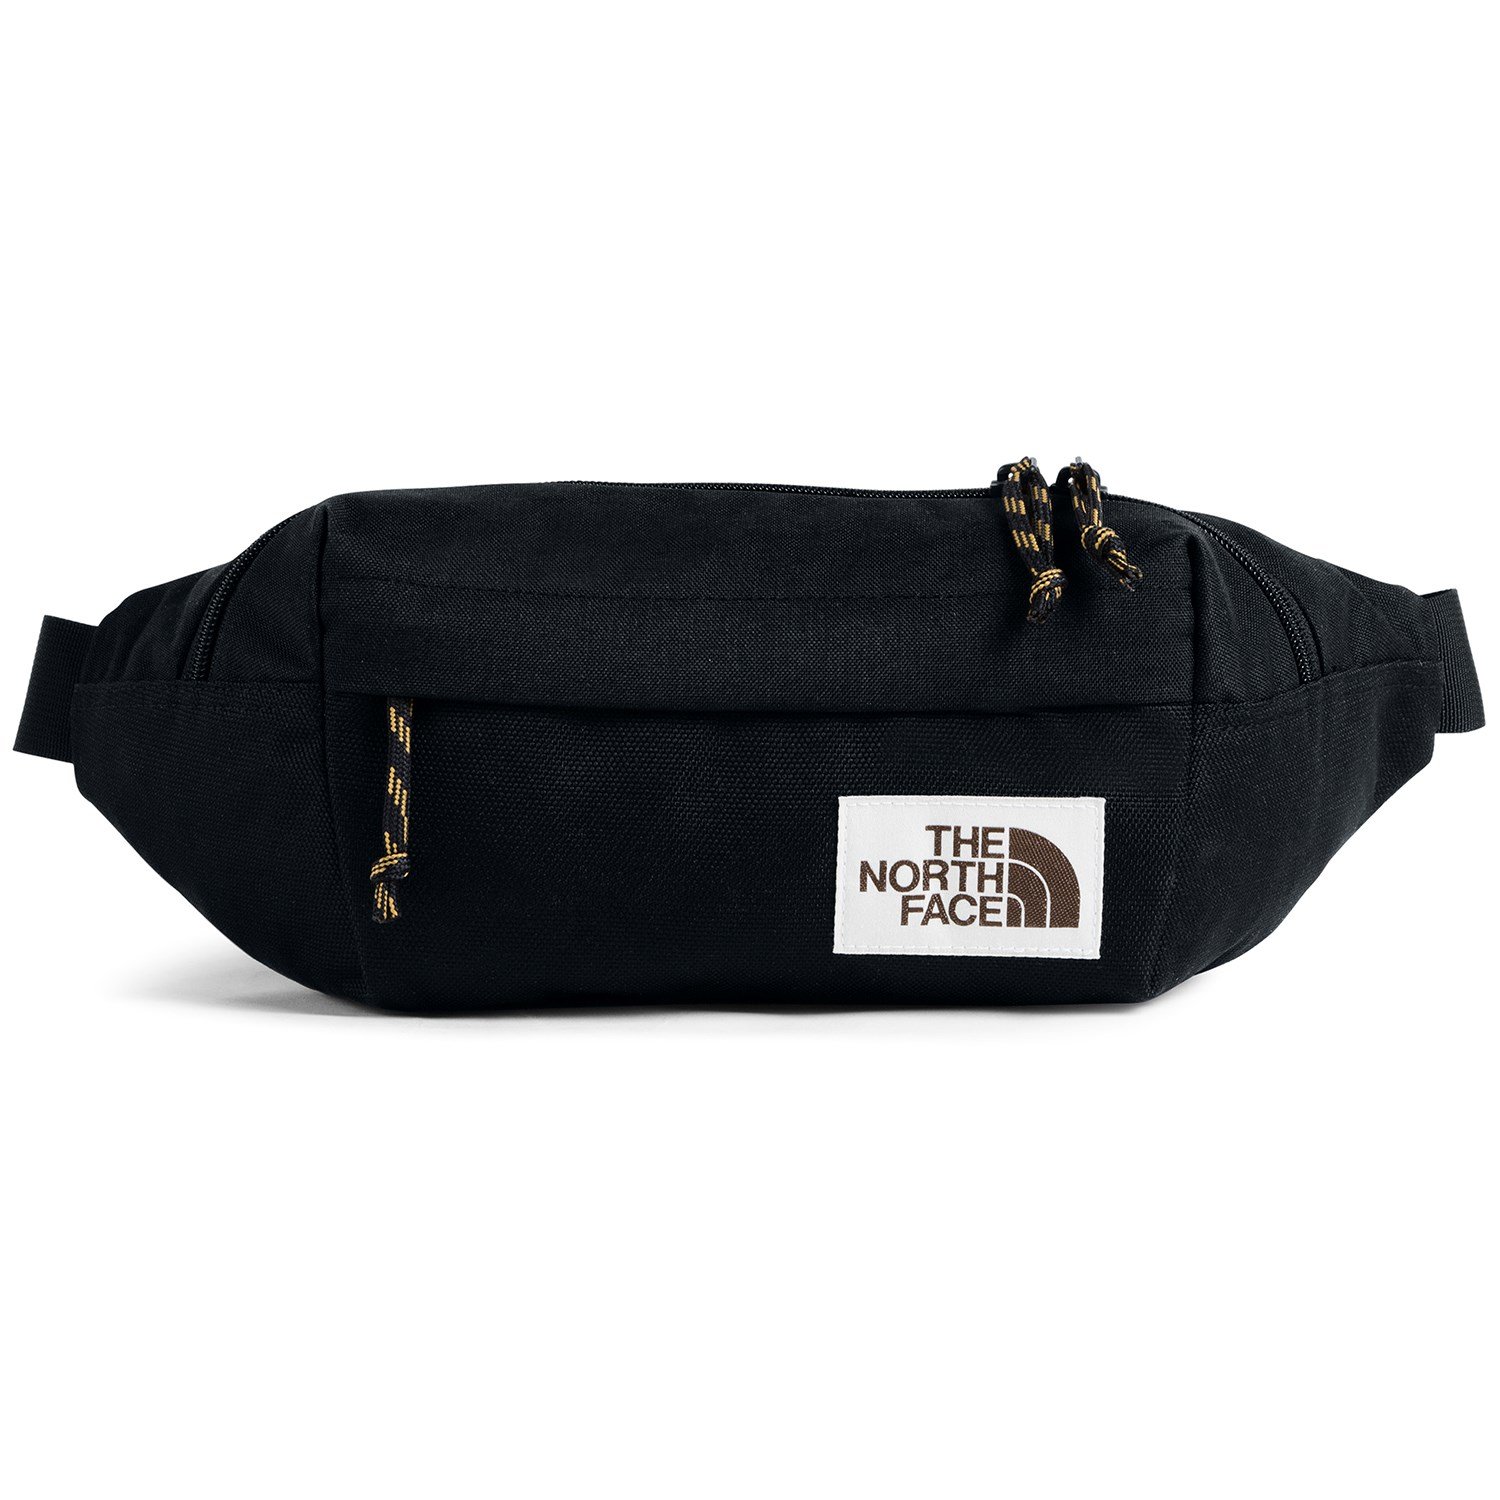 north face fanny pack